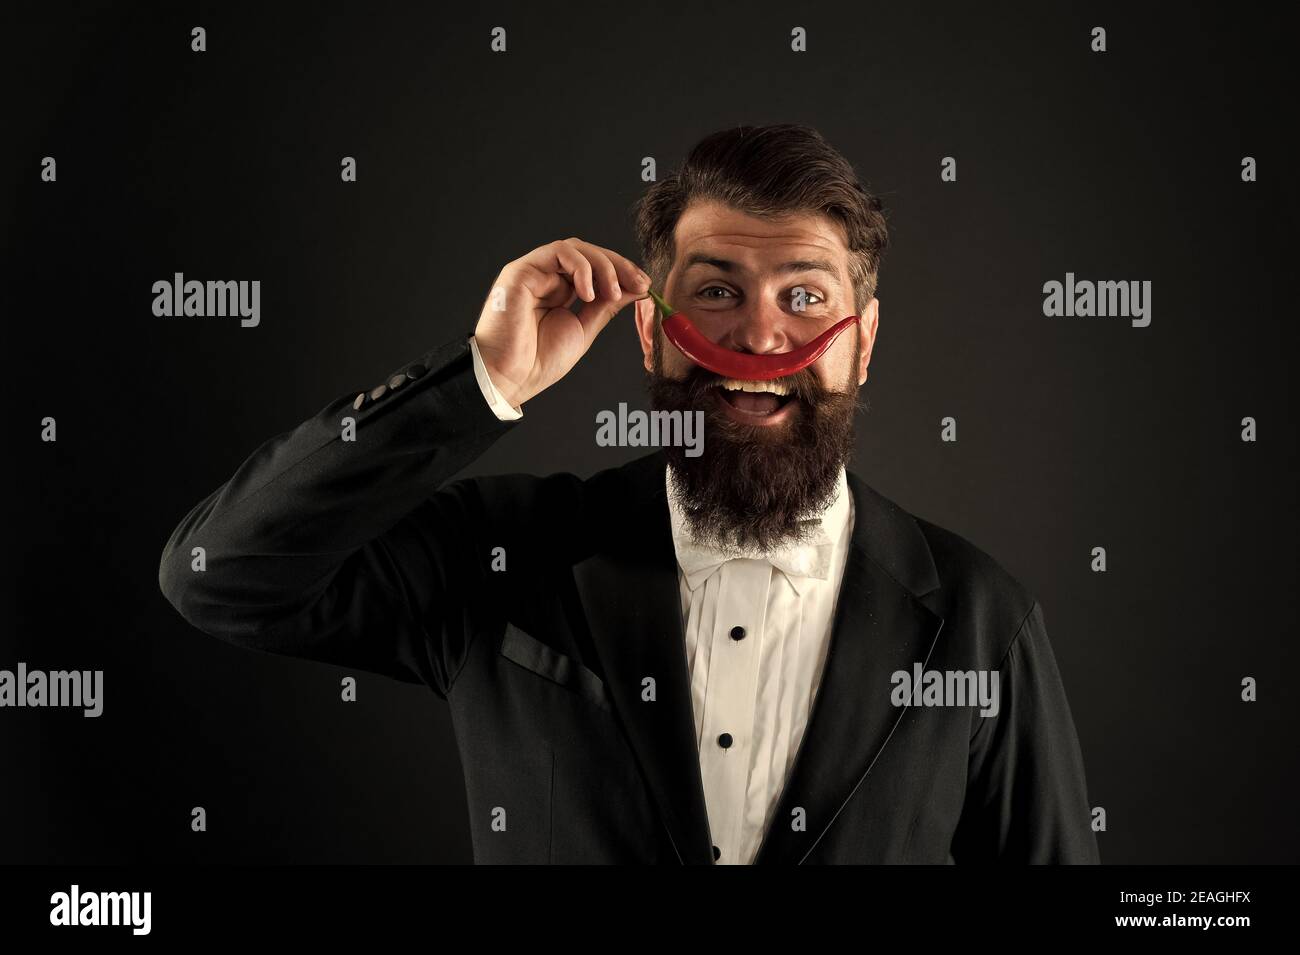 Pepper mustache. Bearded businessman hold chilli red pepper in hand. Guy hold Hot chilli pepper black background. Handsome macho likes spicy taste. Man hold pepper harvest. Barber funny face. Stock Photo